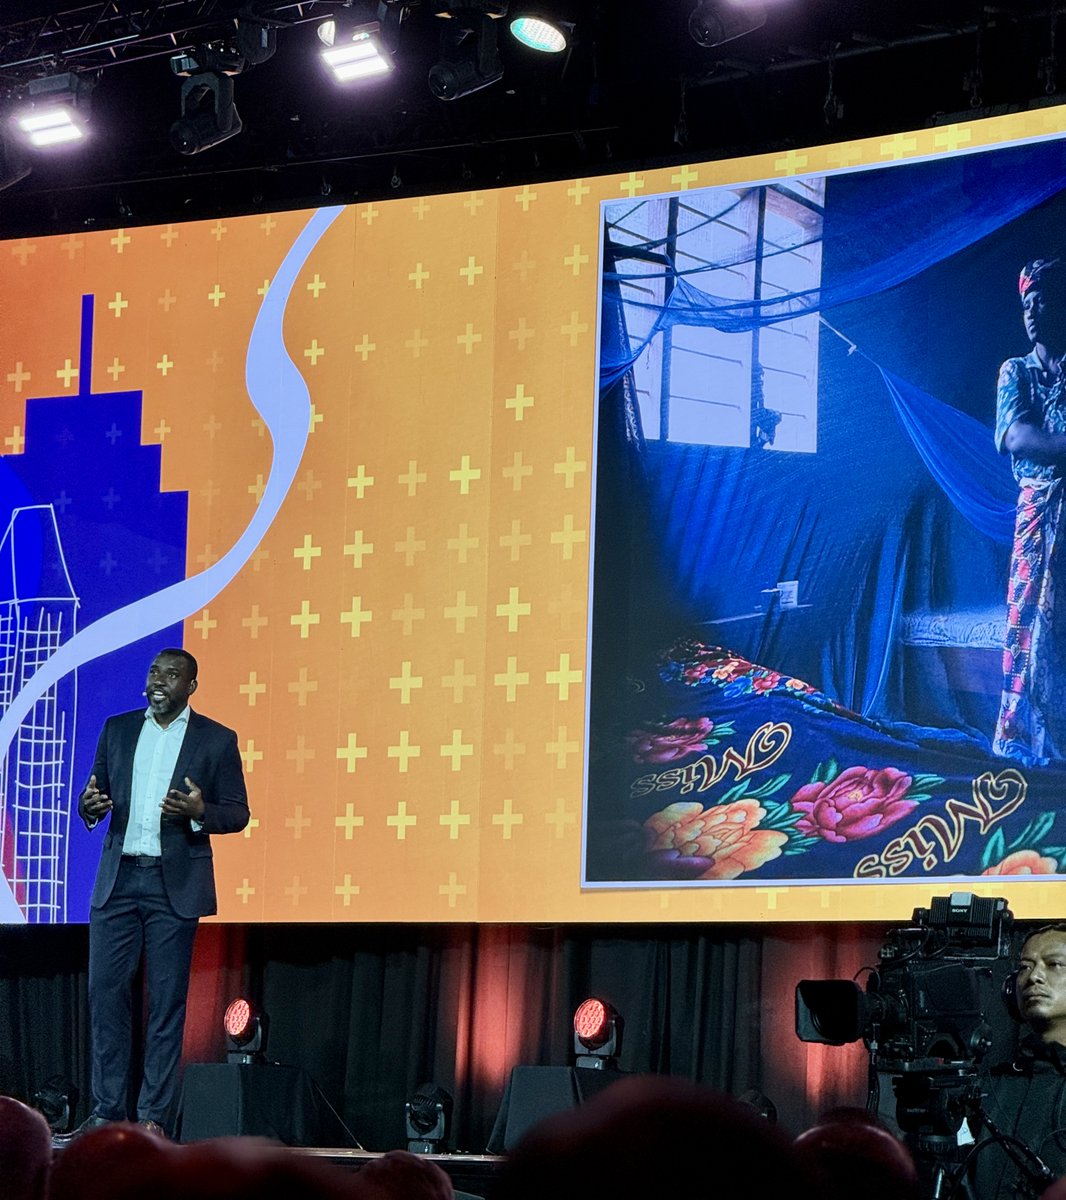 An honor to have Dr. @obinnaonyekwena, Deputy Director of Infectious Diseases Advocacy at @gatesfoundation on the @Rotary stage. Thank you for sharing how vital community health workers are to global #PublicHealth. They are the real superheroes. #Rotary24